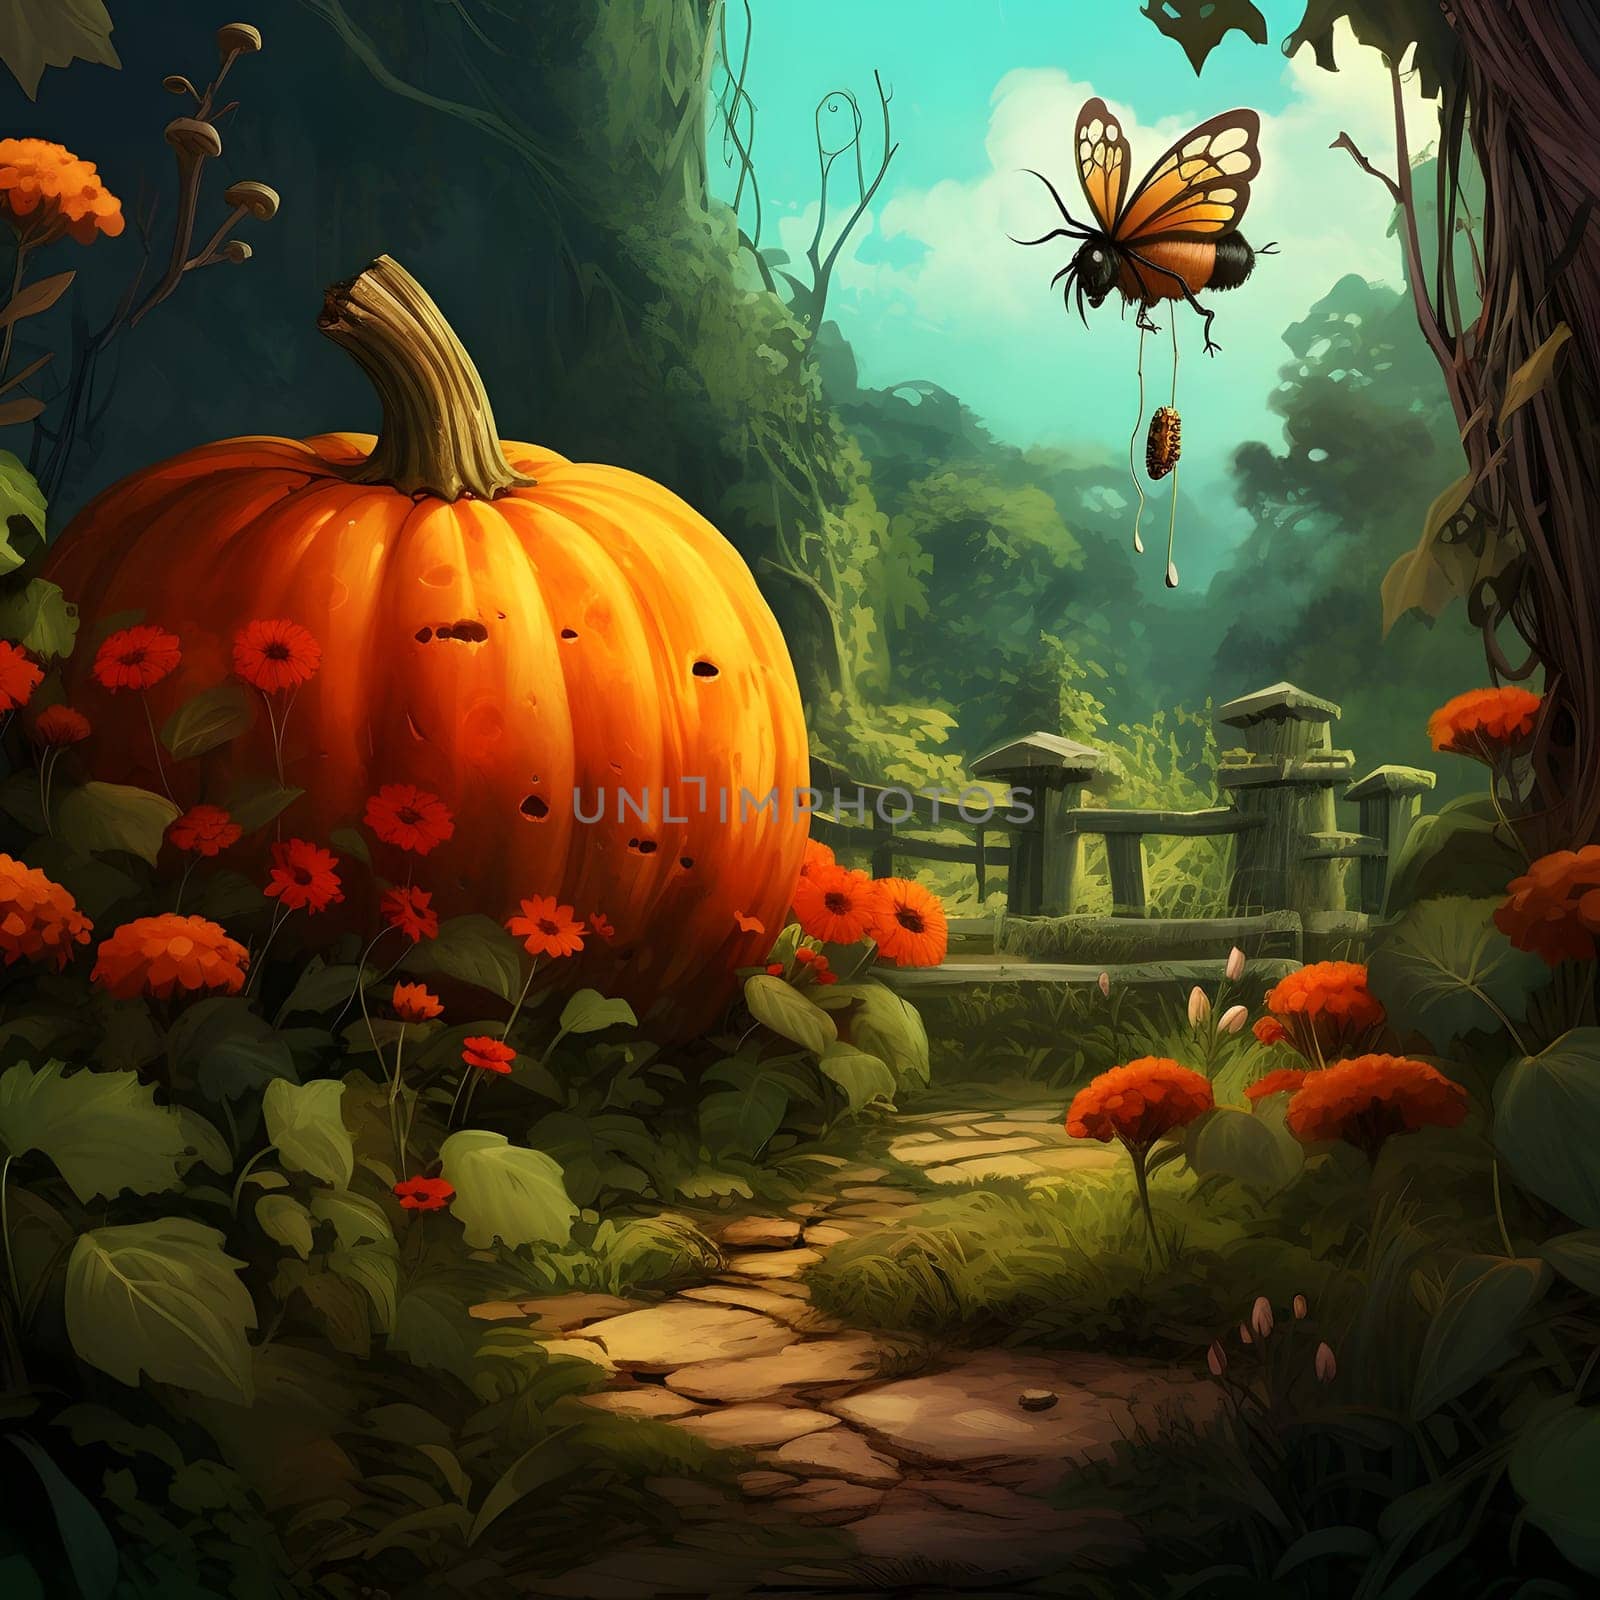 Fairy tale image big bee butterfly, pumpkin, red flowers. Pumpkin as a dish of thanksgiving for the harvest. by ThemesS